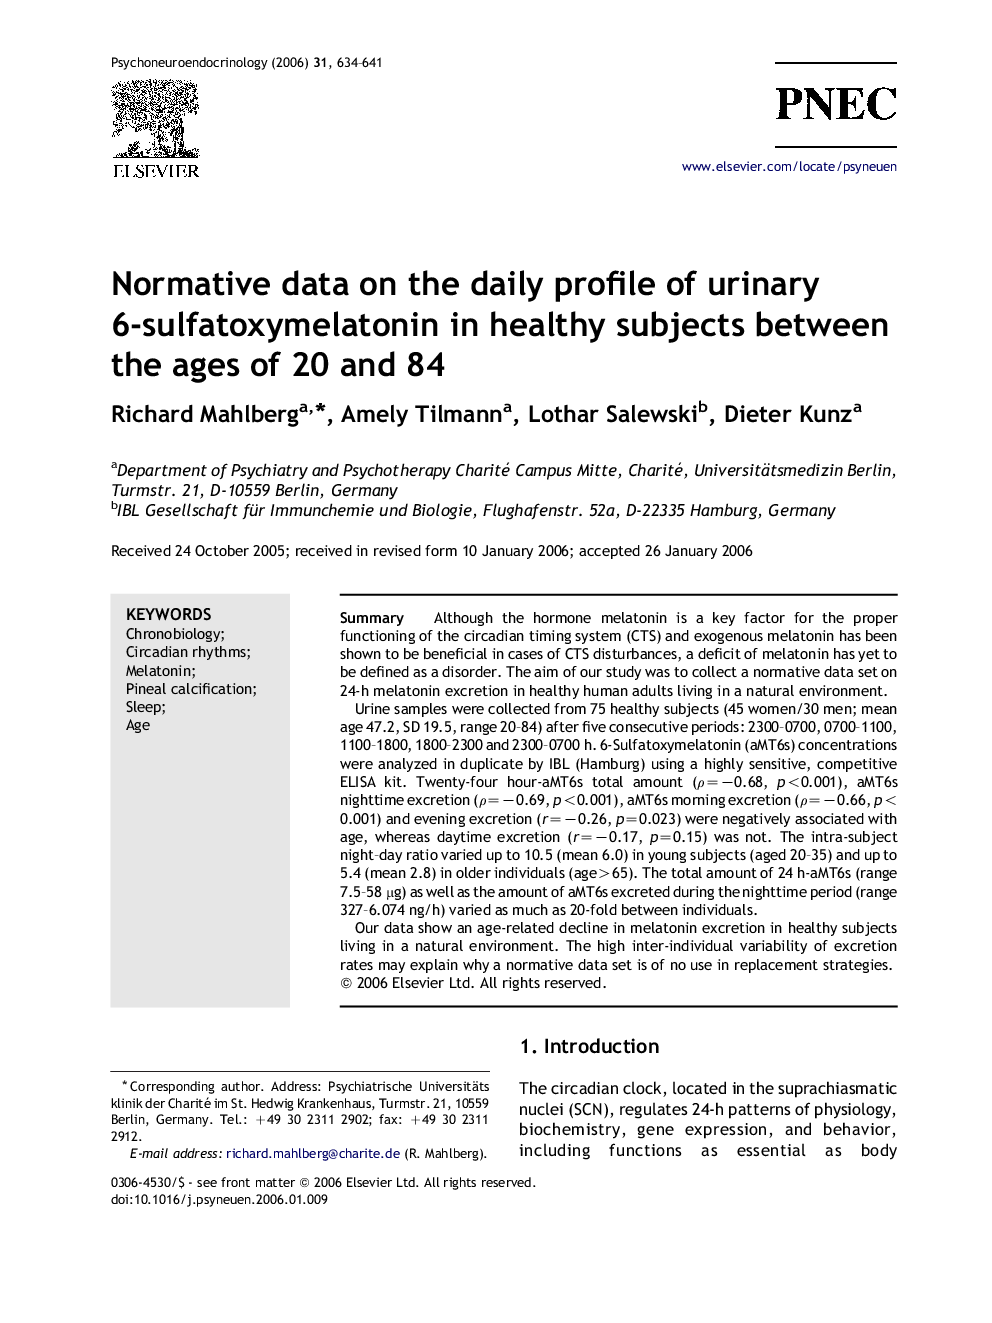 Normative data on the daily profile of urinary 6-sulfatoxymelatonin in healthy subjects between the ages of 20 and 84